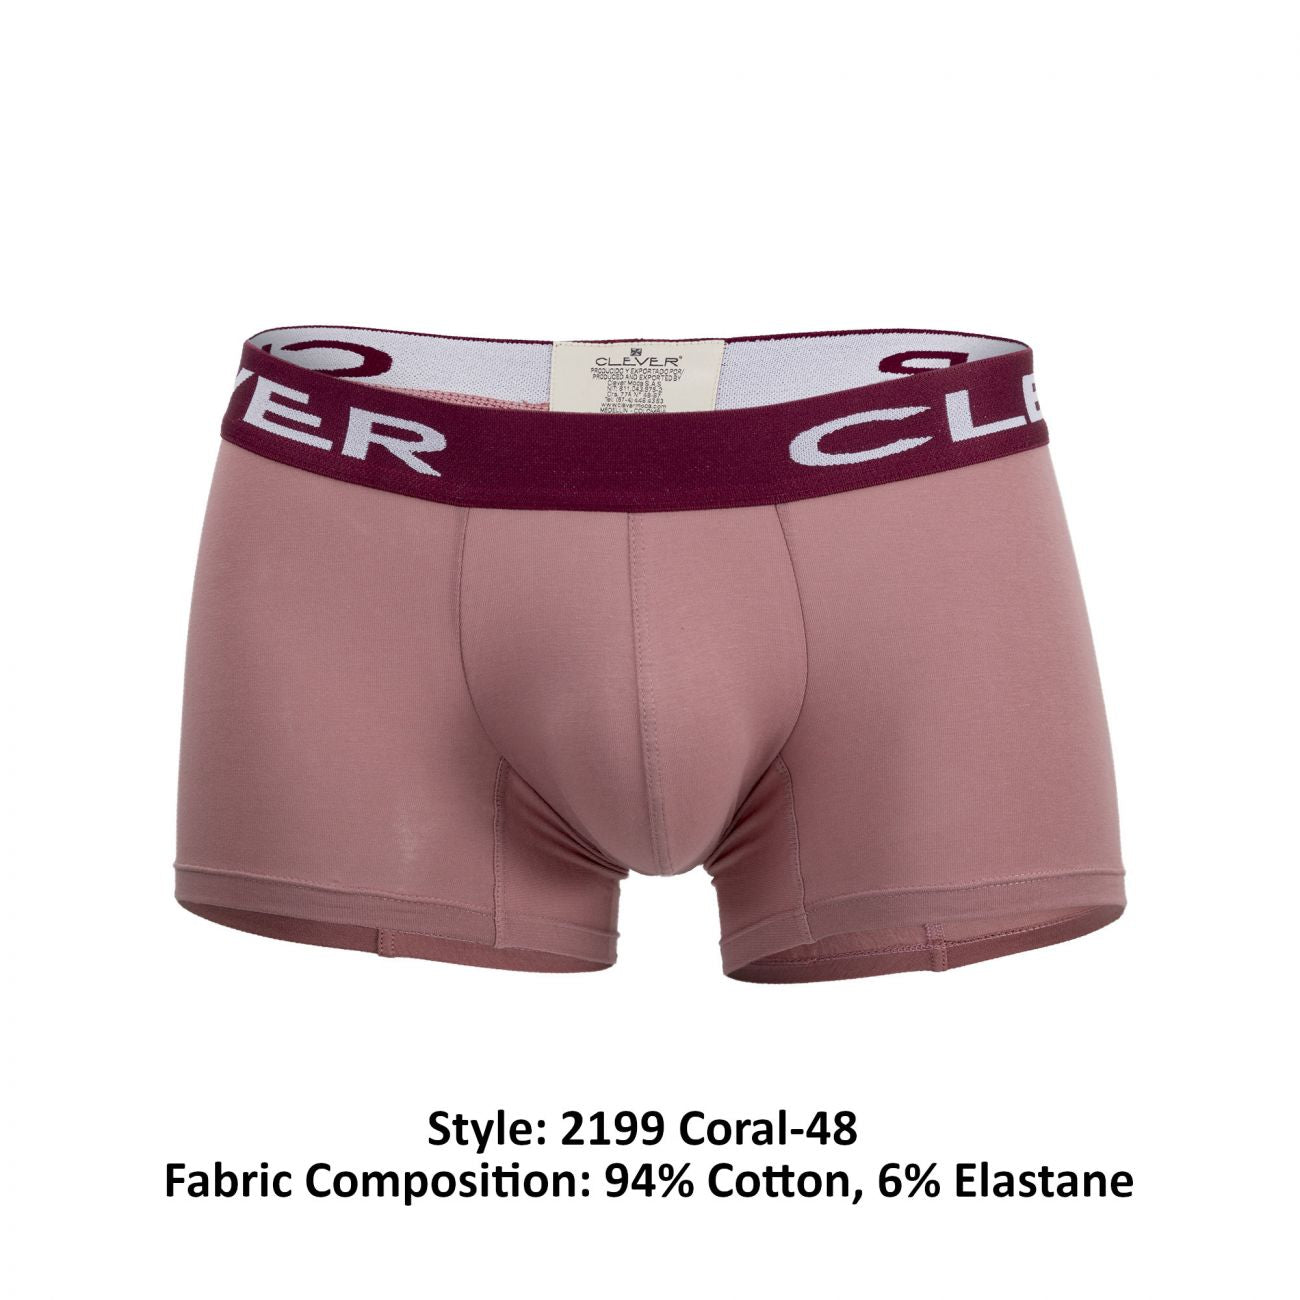 Clever 2199 Limited Edition Boxer Briefs Trunks Coral